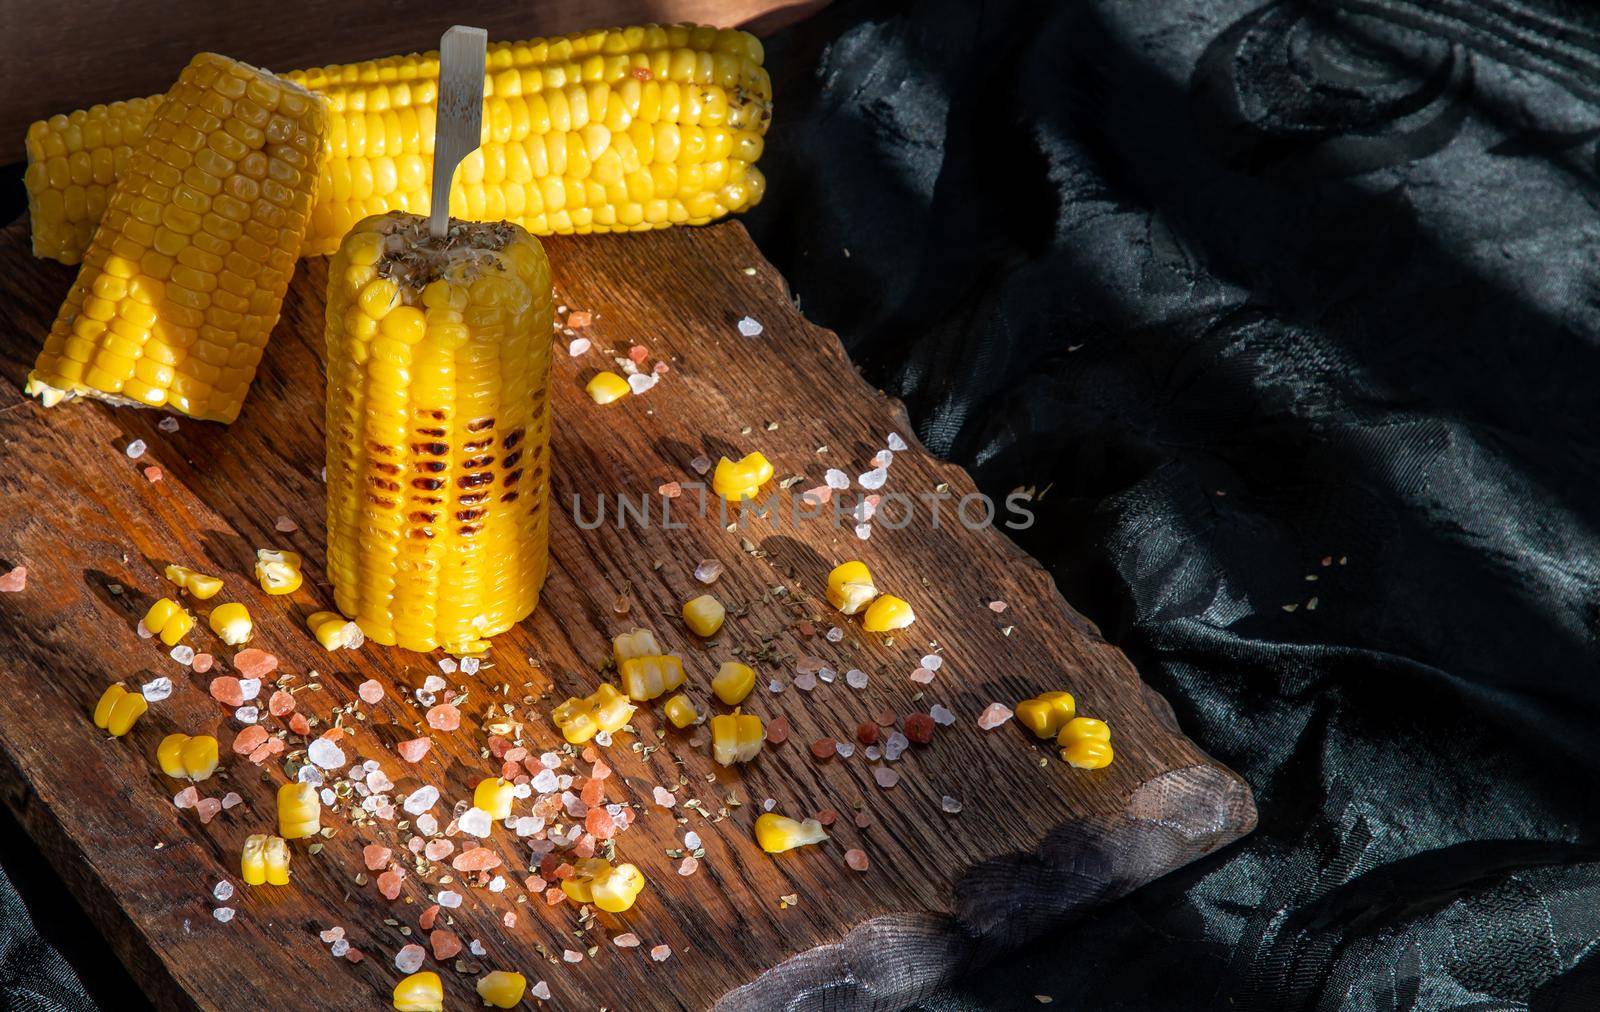 Grilled corn on the cob  on rustic wooden board  over dark background. by tosirikul